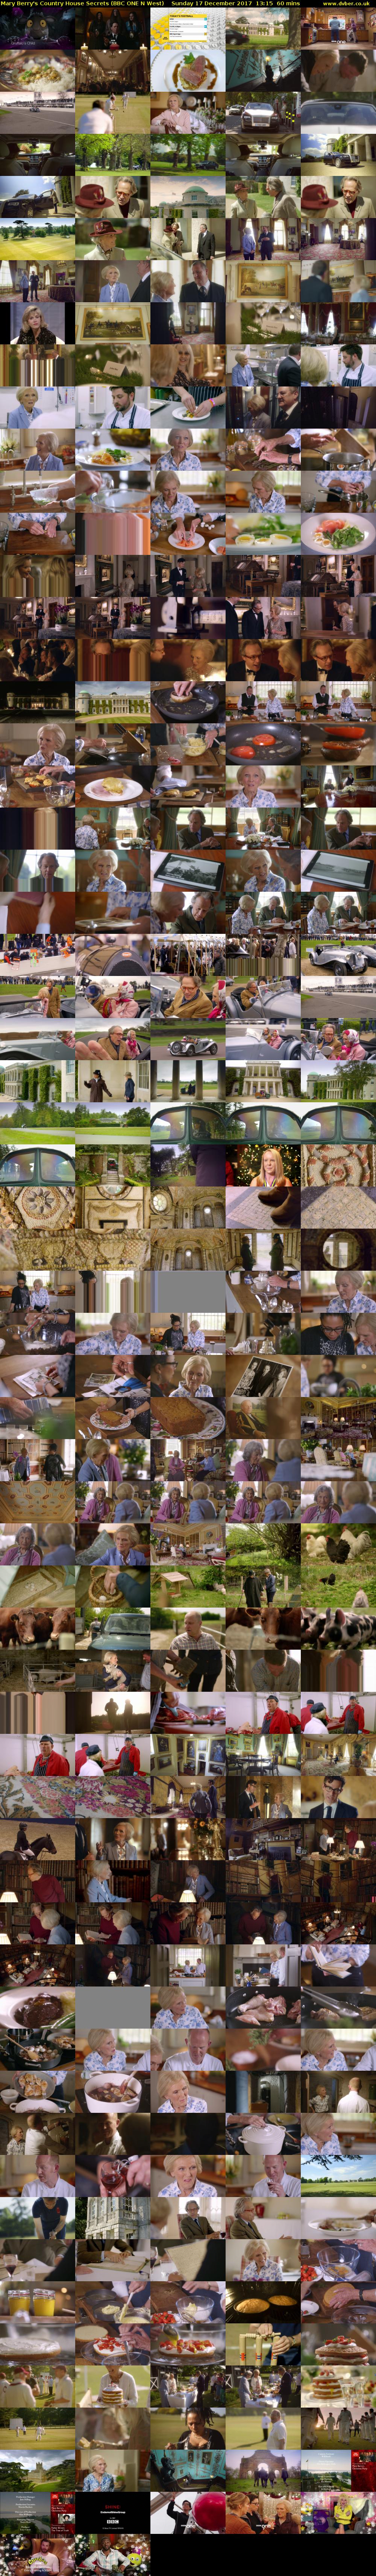 Mary Berry's Country House Secrets (BBC ONE N West) Sunday 17 December 2017 13:15 - 14:15